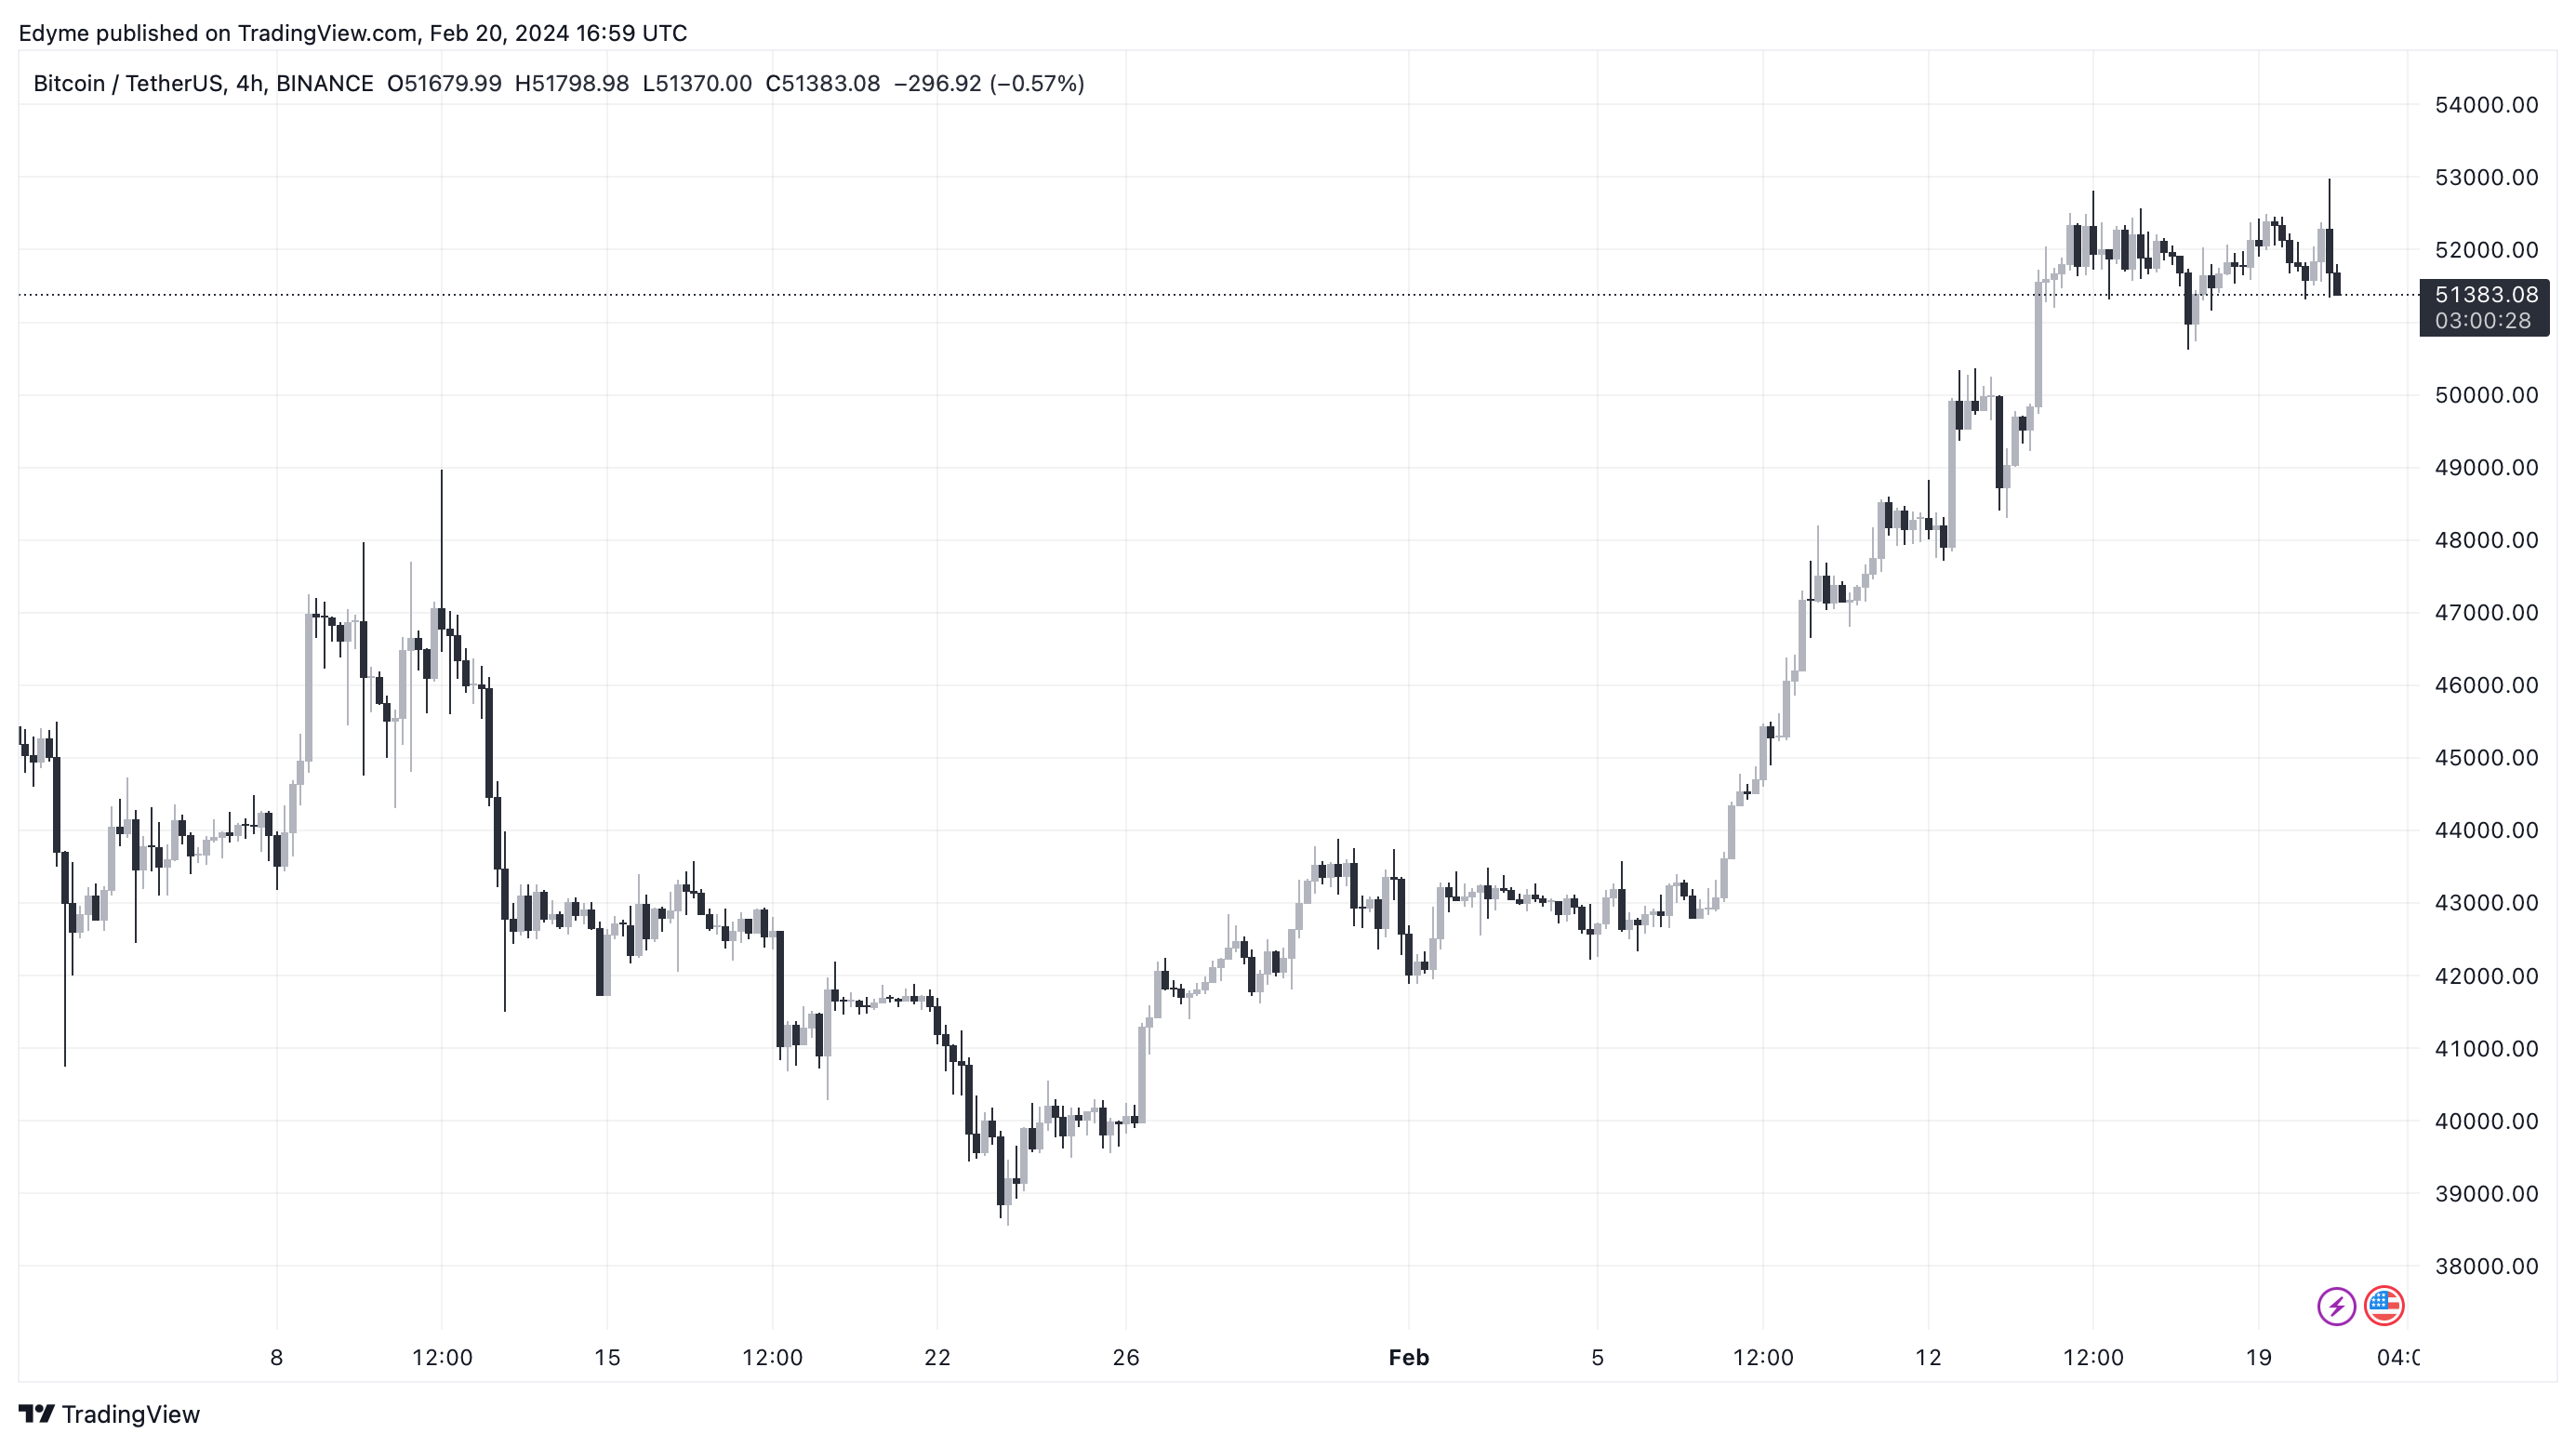 BTC price depicted as a horizontal trend on a 4-hour chart.